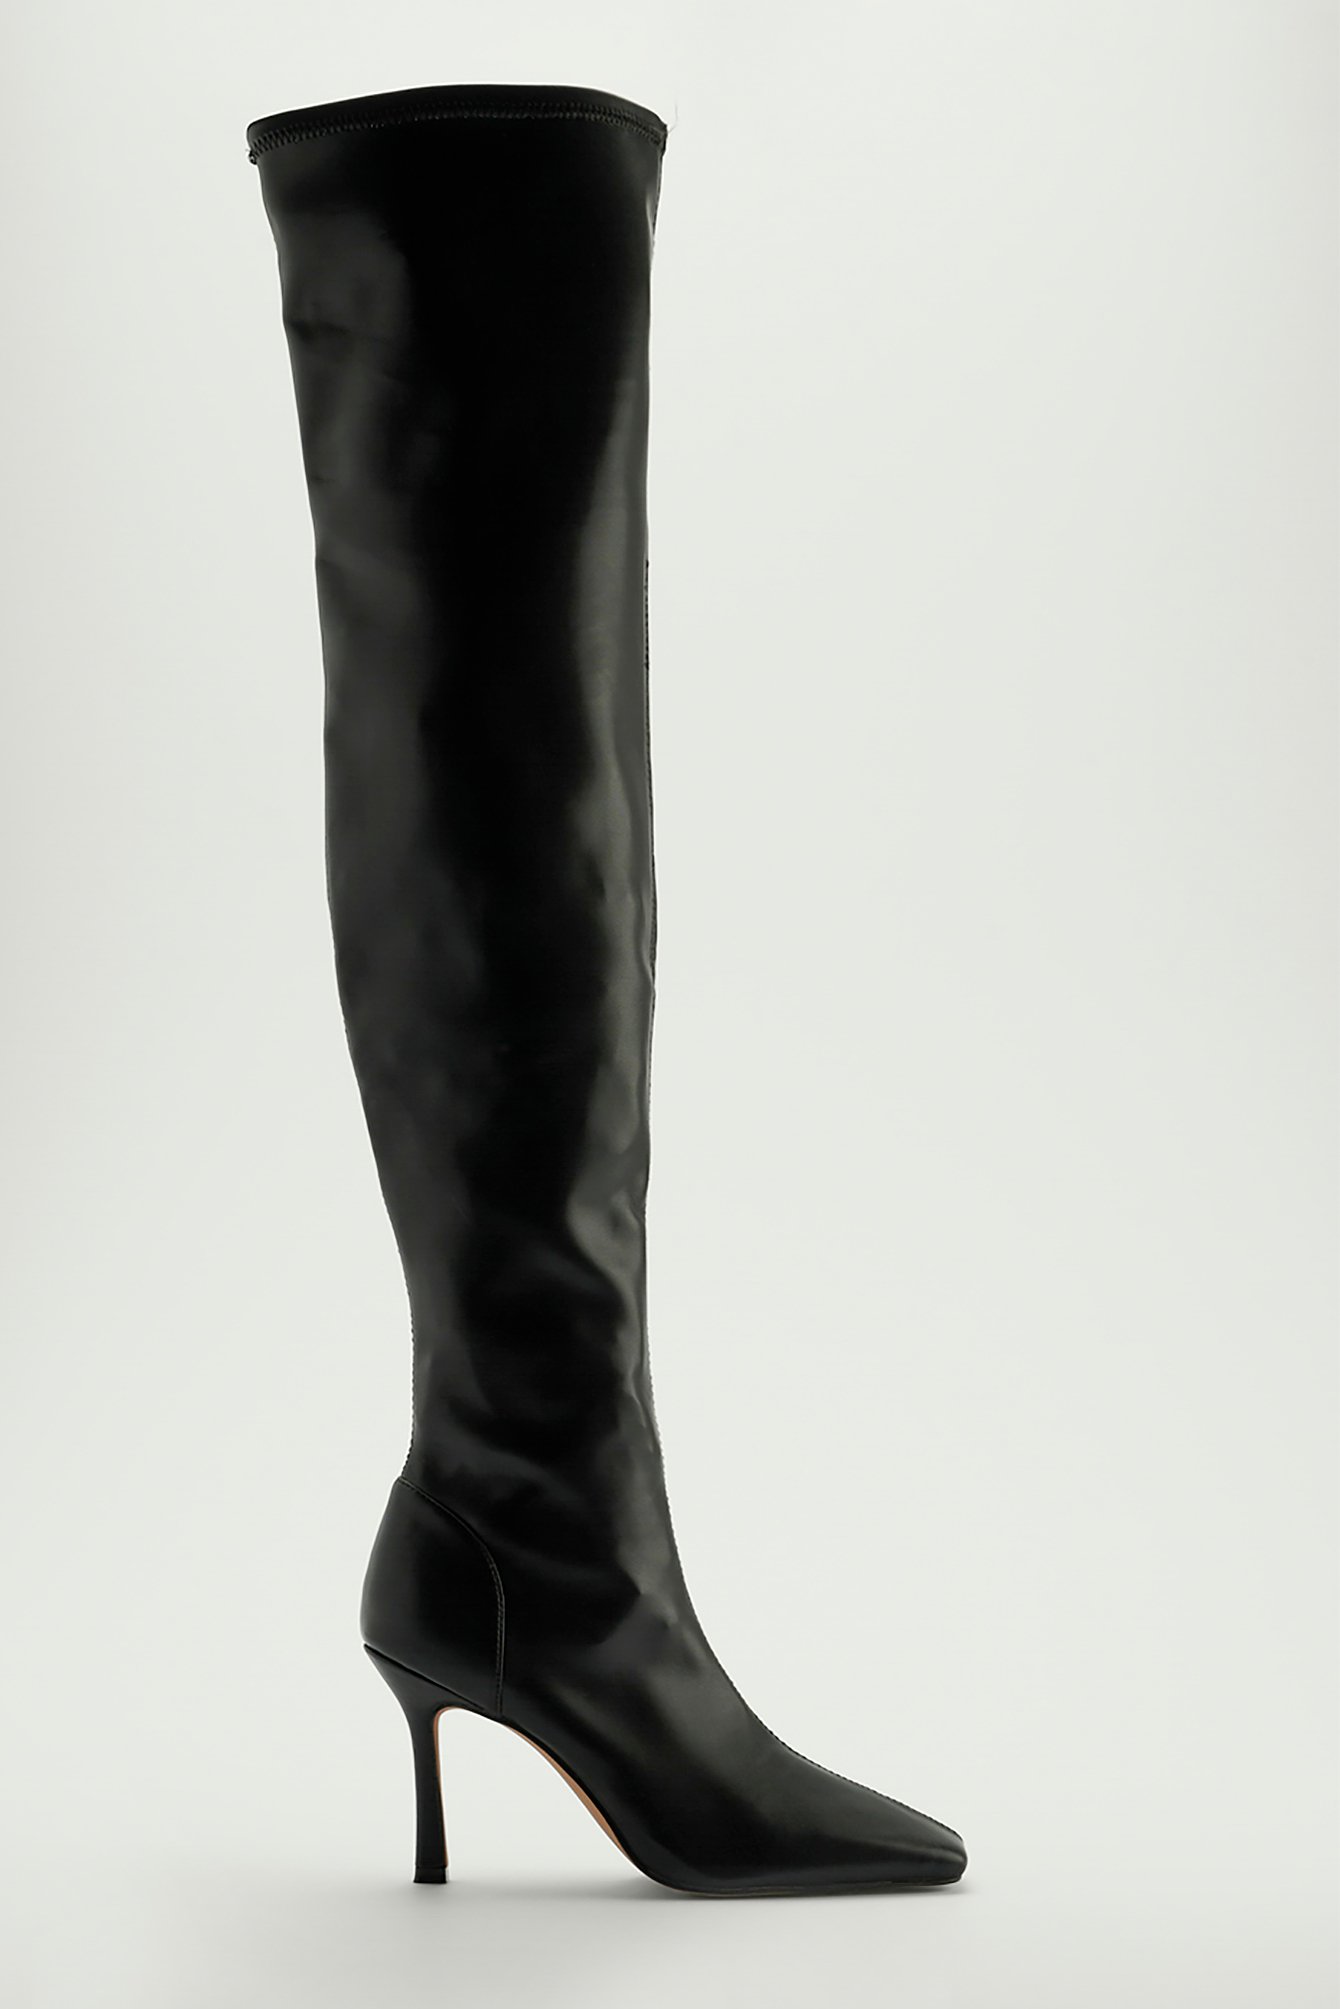 Womens Simple Elegant Pointed Toe Dressy Slim Stretchy Tall Boots Pull On Mid Chunky Heel Over The Knee Boots